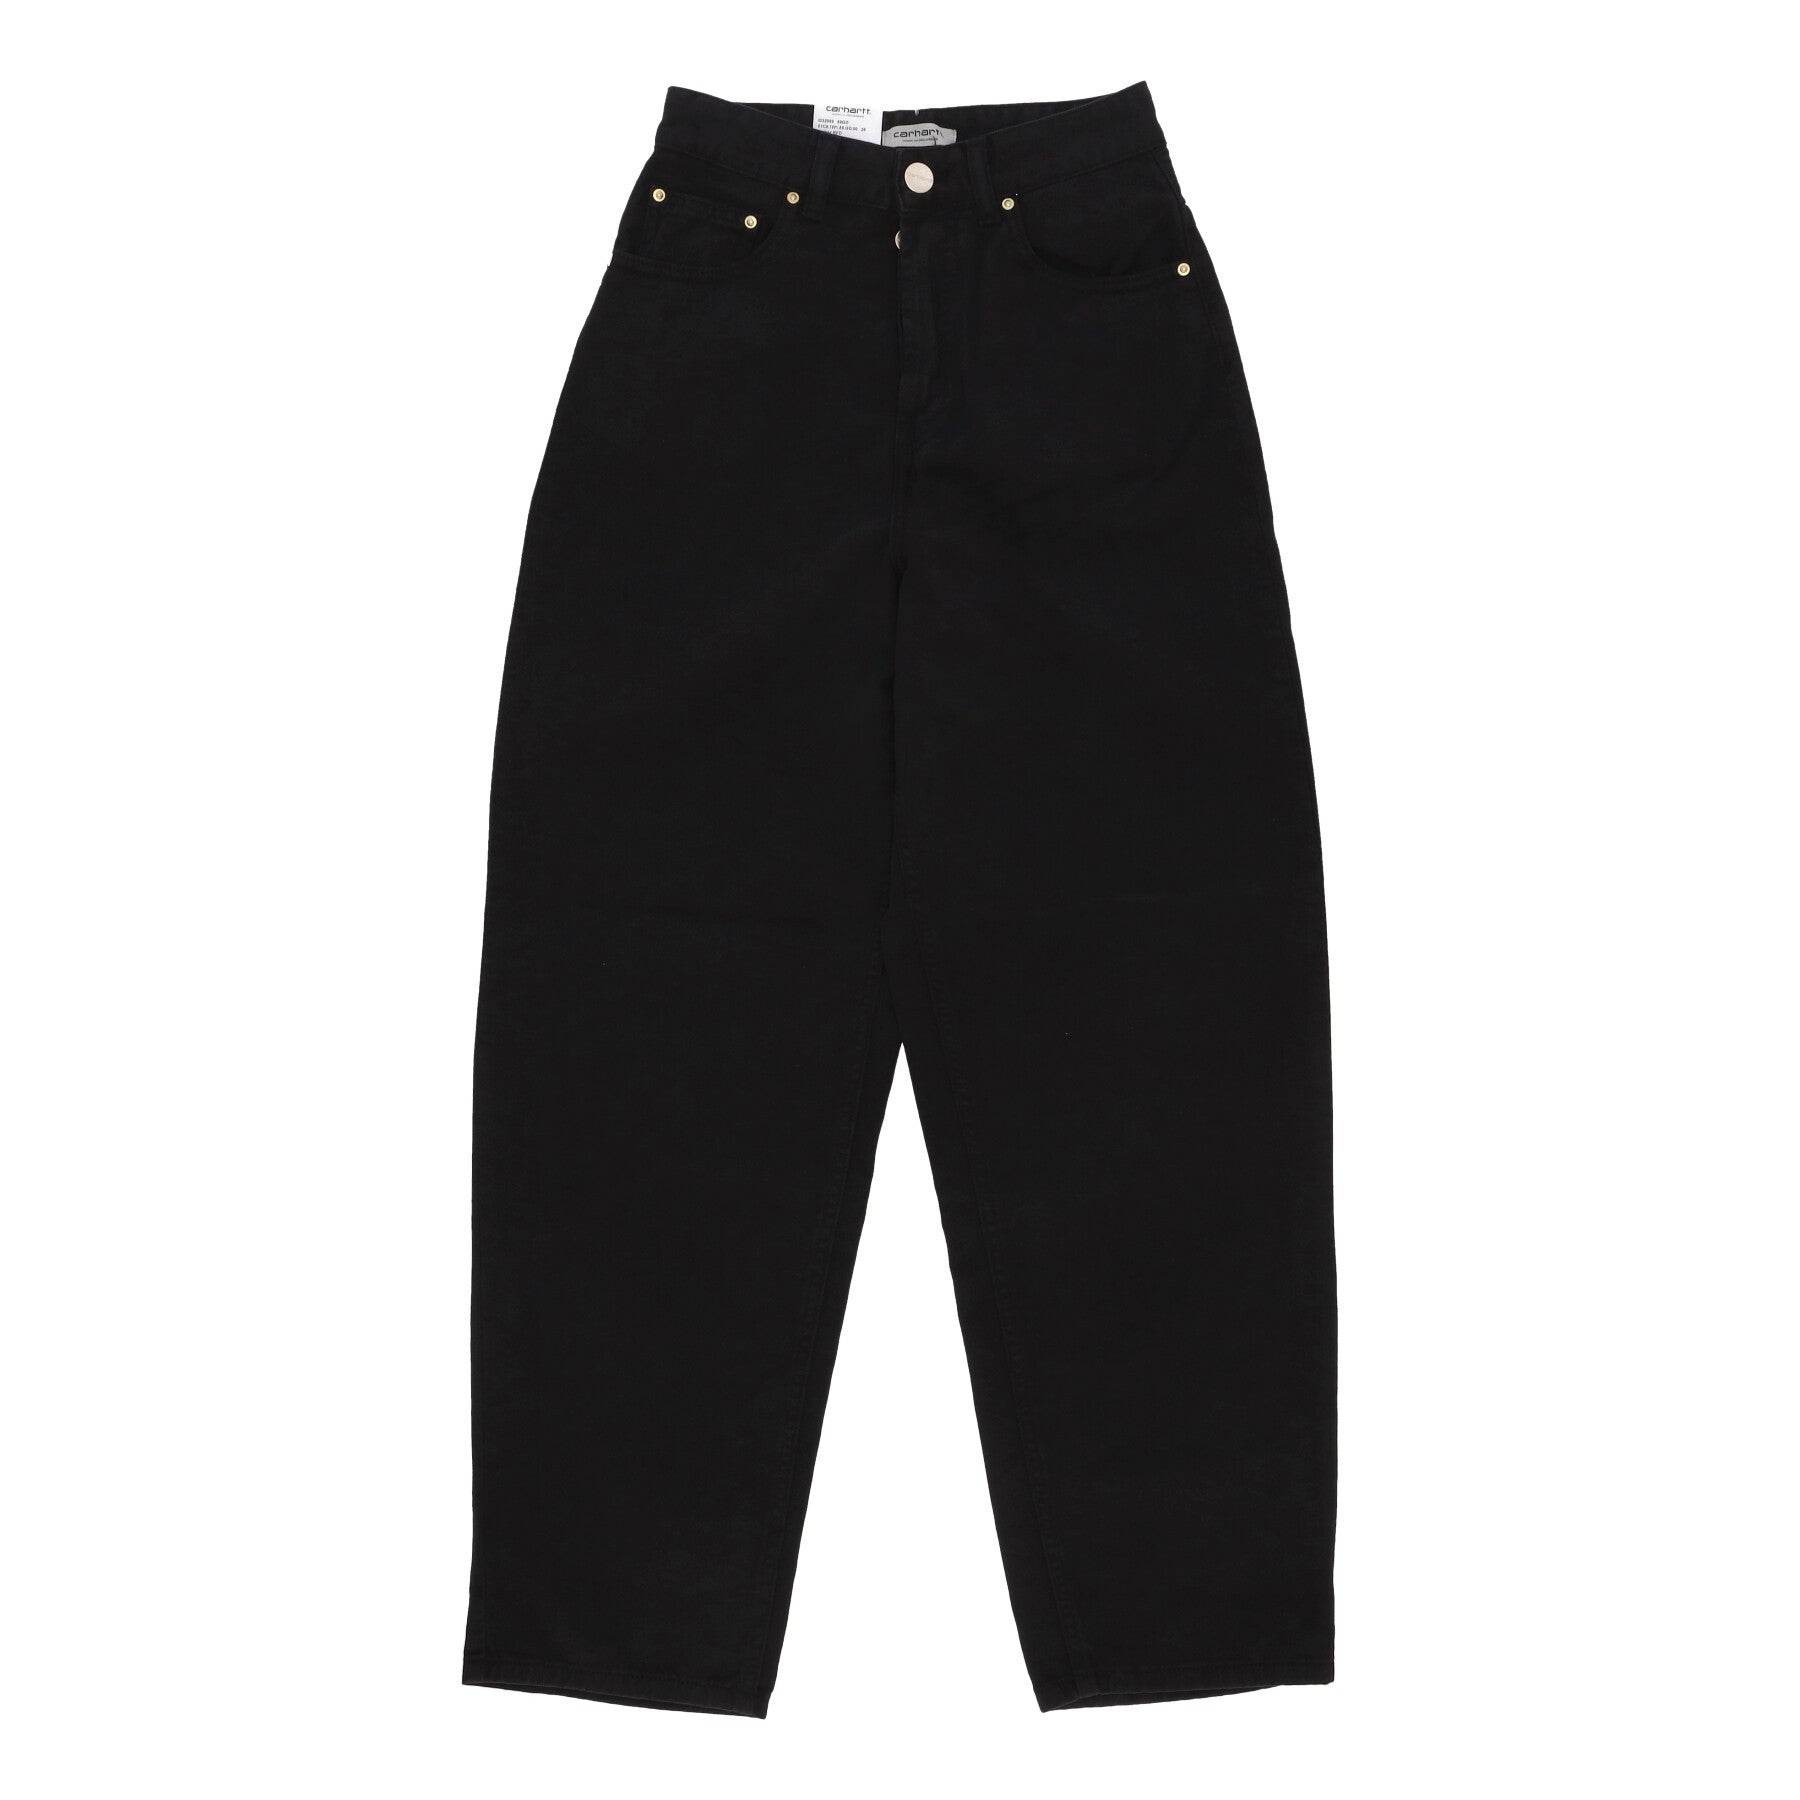 Carhartt Wip, Jeans Donna W Derby Pant, Black Garment Dyed